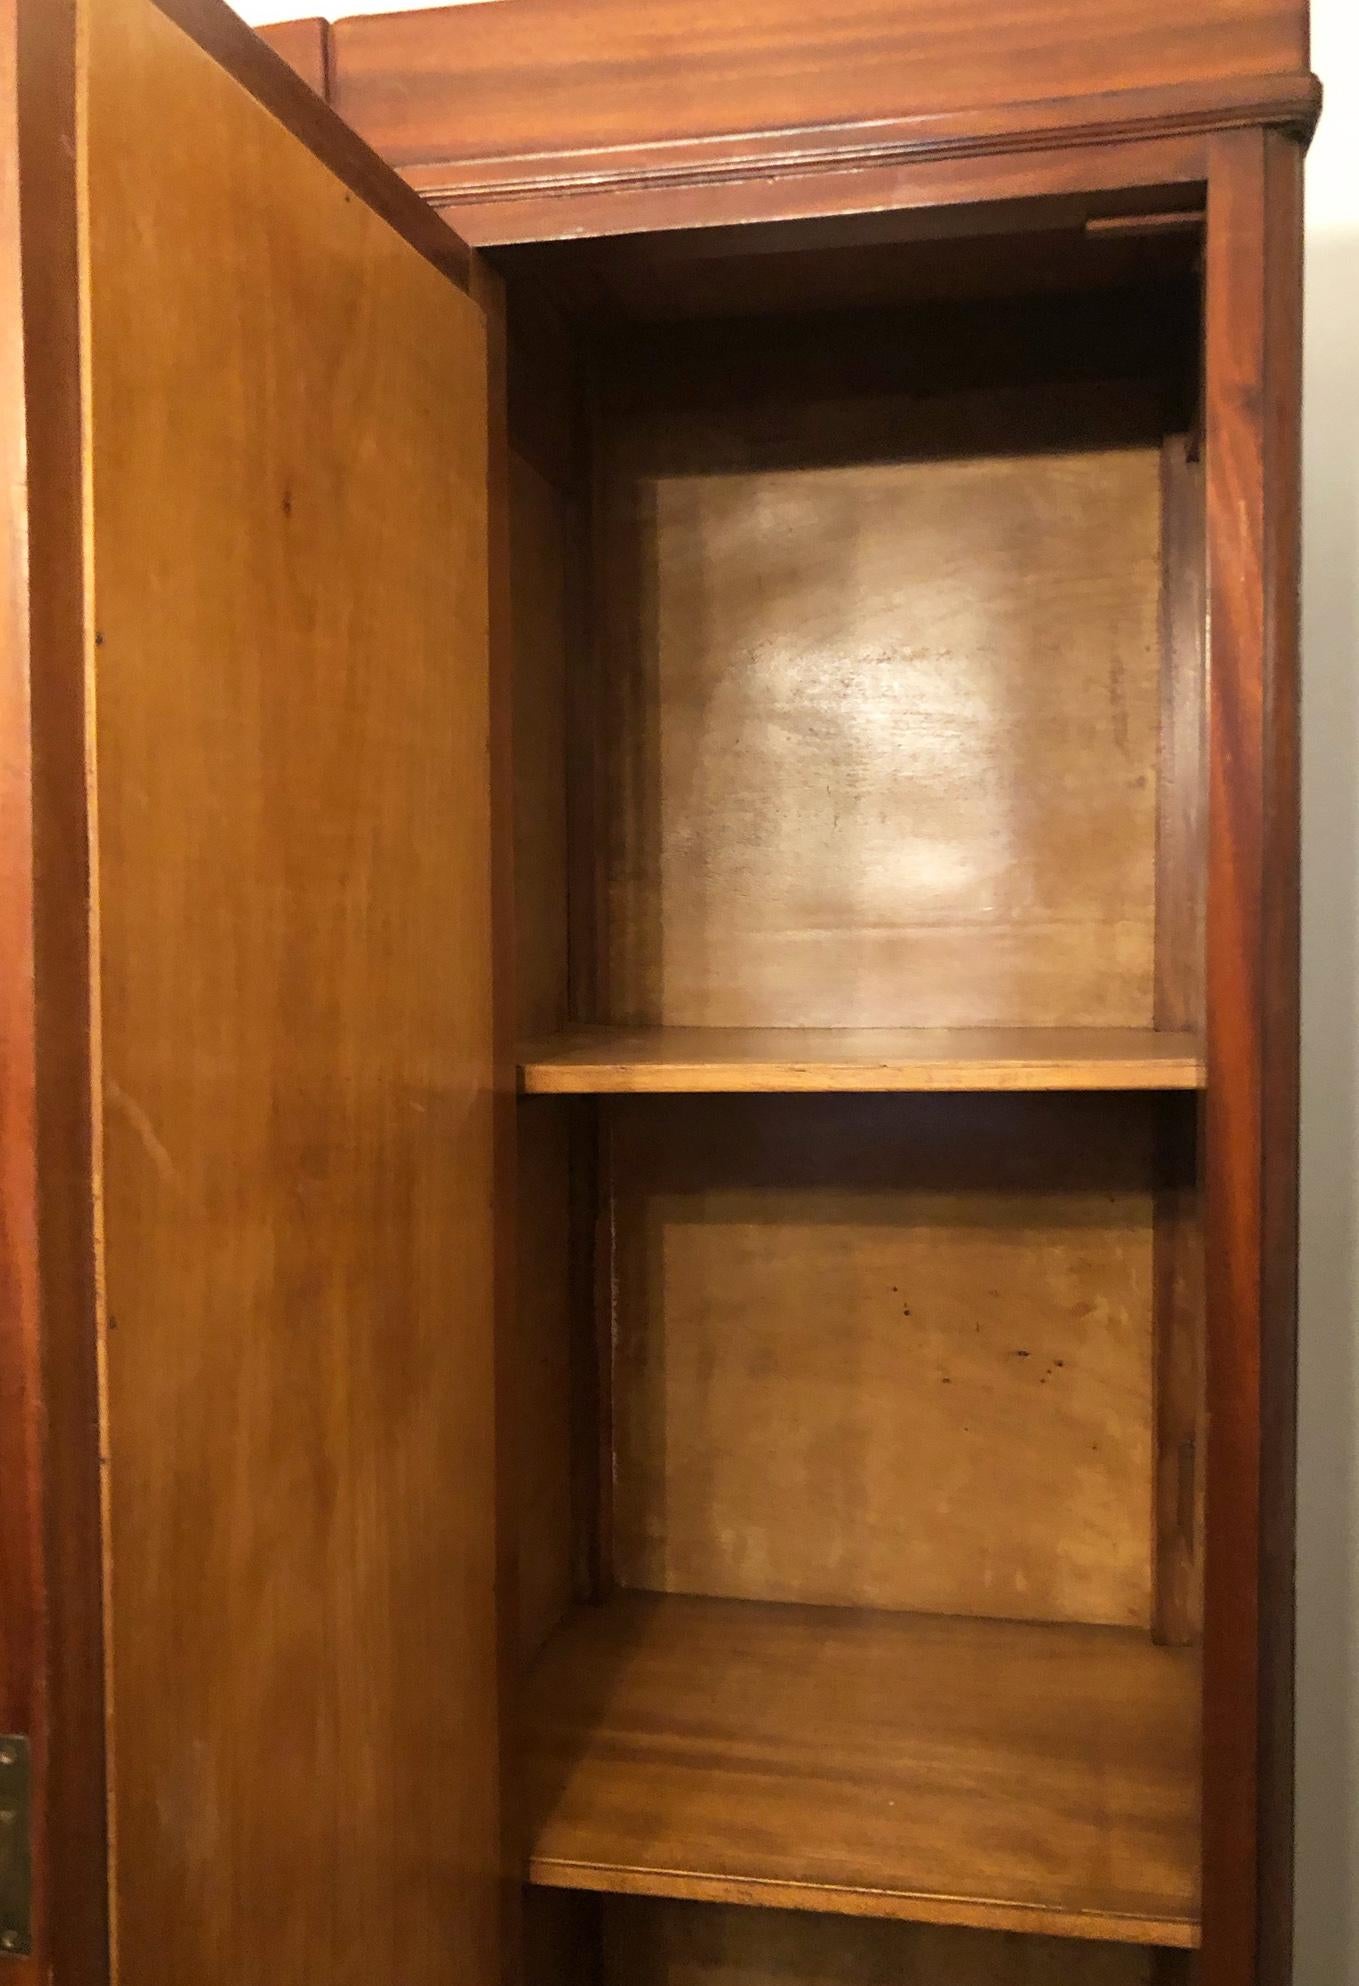 20th Century Italian wardrobe with two doors in original walnut color with mirrors.
The wardrobe is made up of two mahogany blocks joined together, with two drawers at the bottom and a mirrored door at the top and a clothes rail with internal